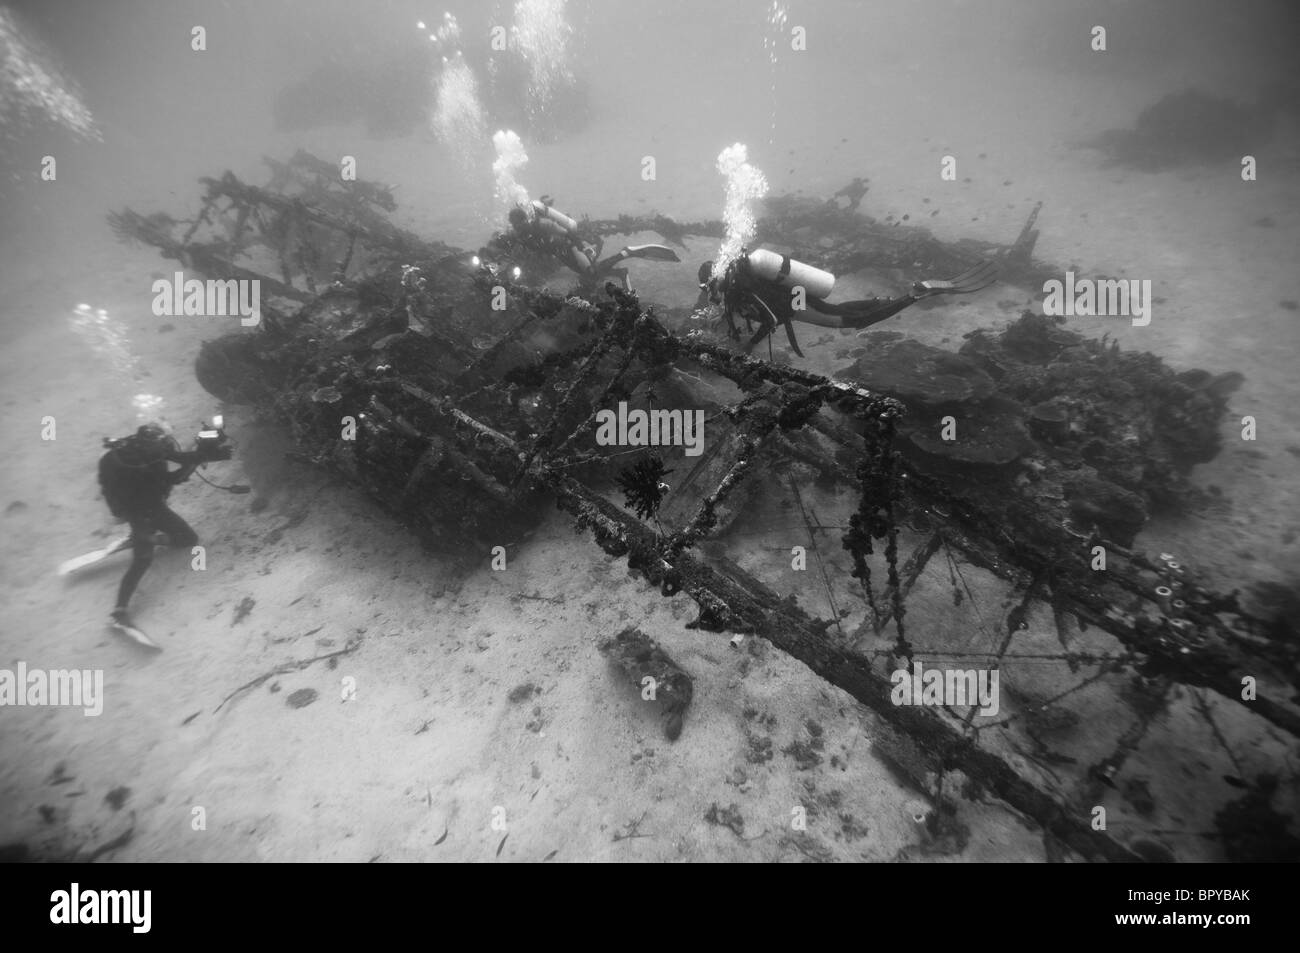 Wreck of Sikorsky S-38 once owned by Herbert Johnson of S C Johnson, Manokwari, West Papua, Indonesia. Stock Photo